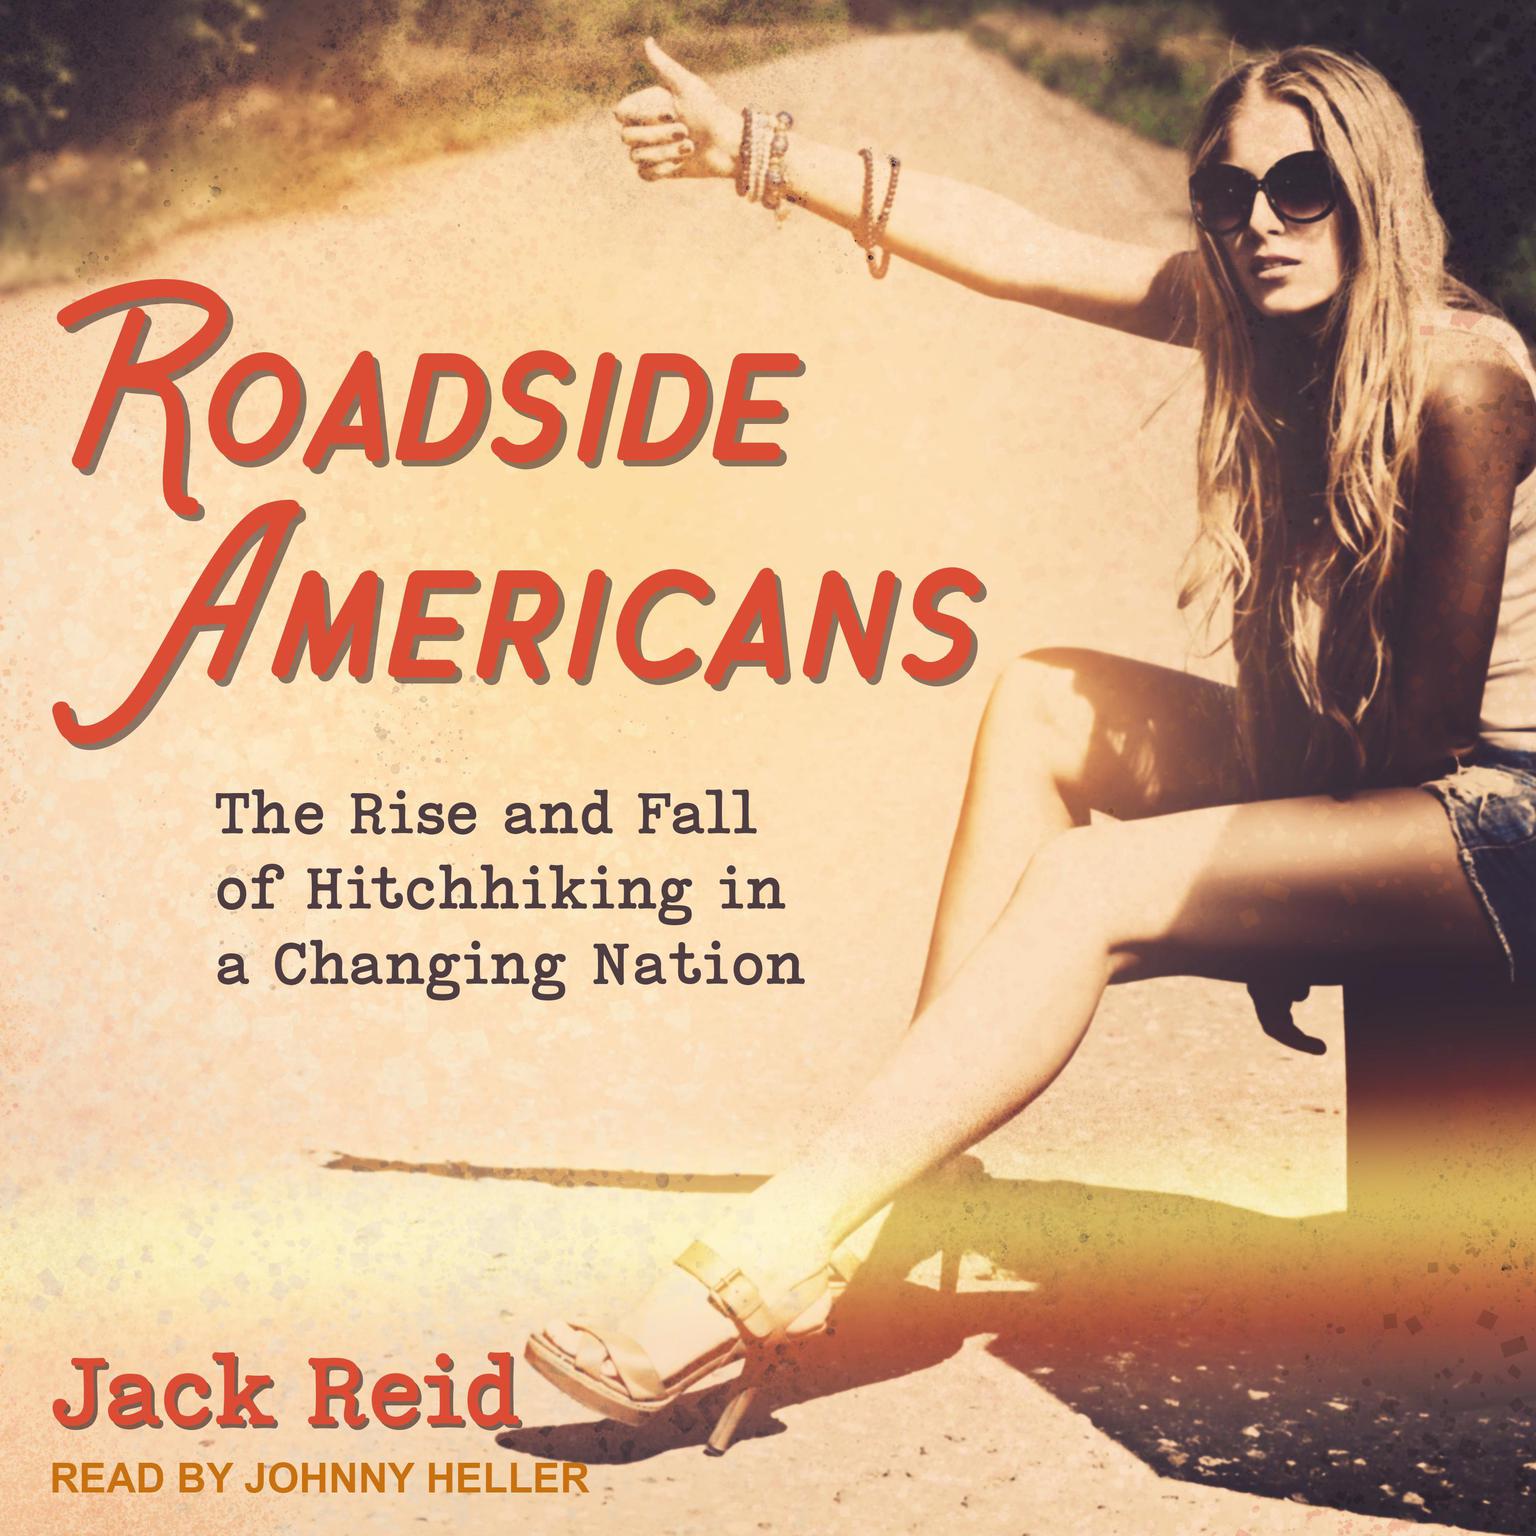 Roadside Americans: The Rise and Fall of Hitchhiking in a Changing Nation Audiobook, by Jack Reid